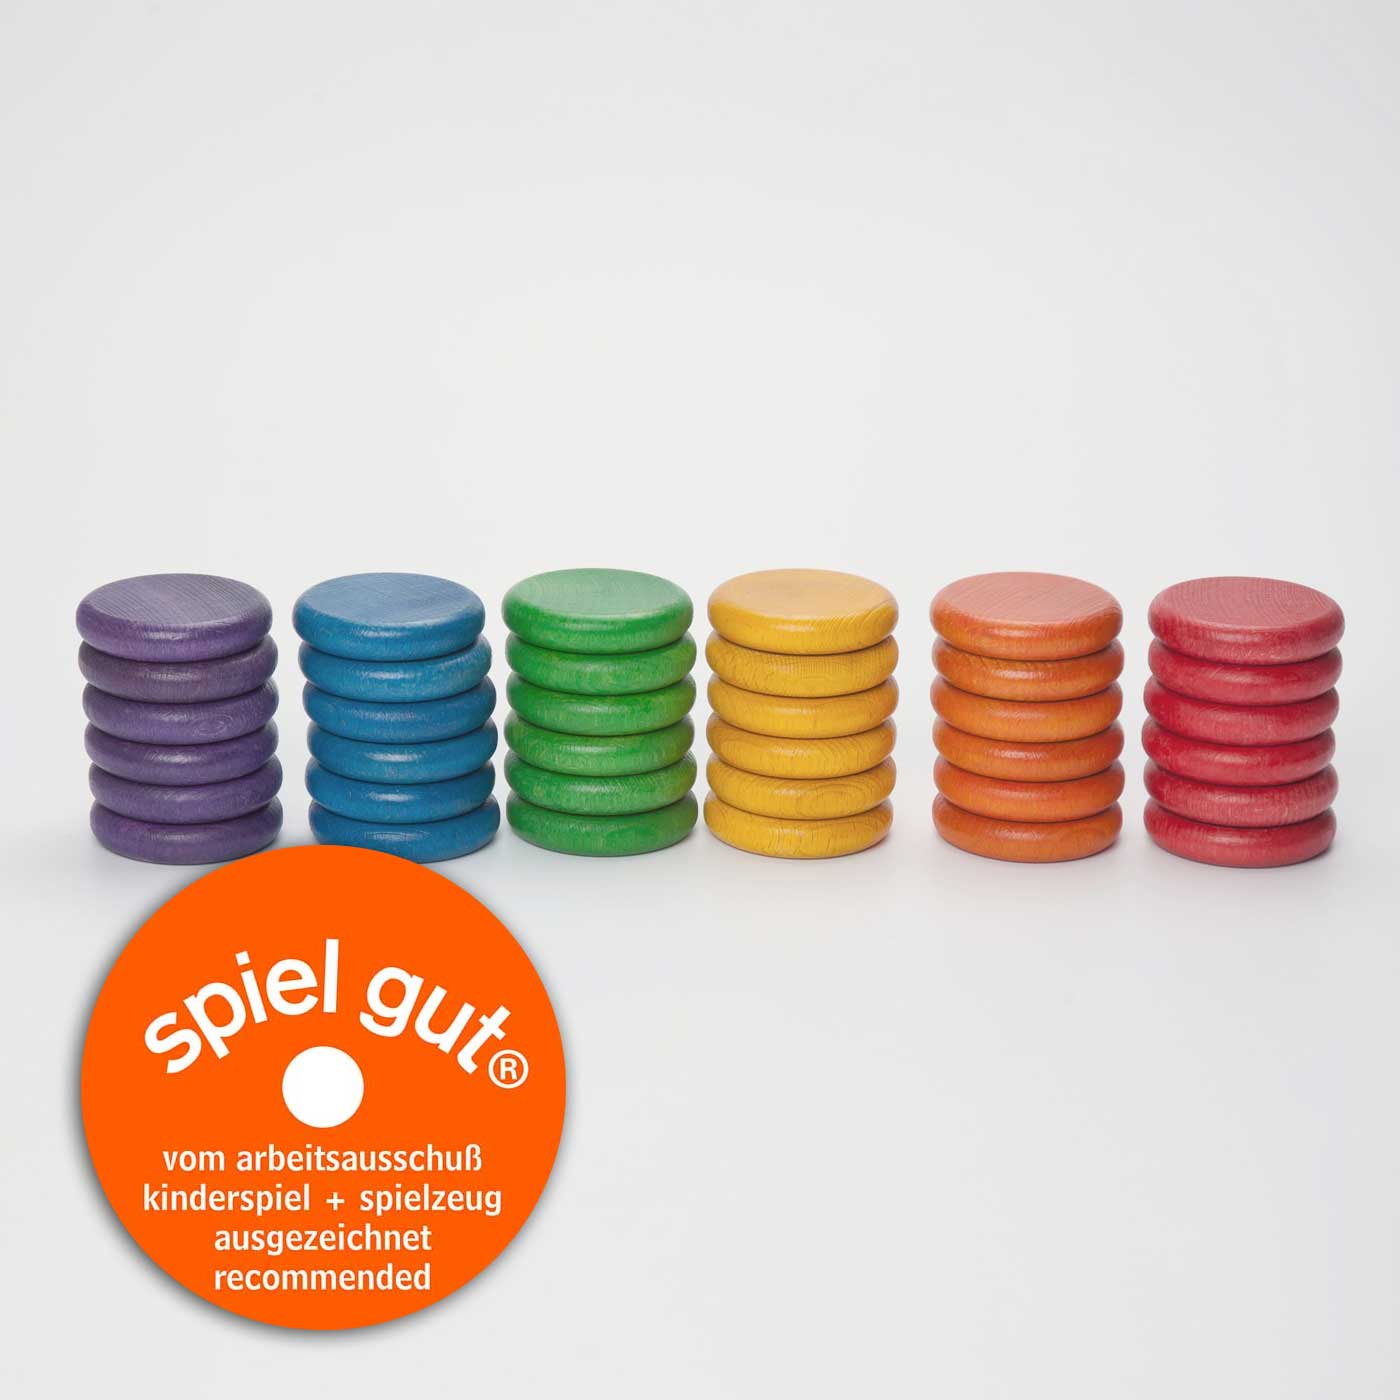 A stack of 36 wooden coins, 6 in each stack, one of each color of the rainbow.